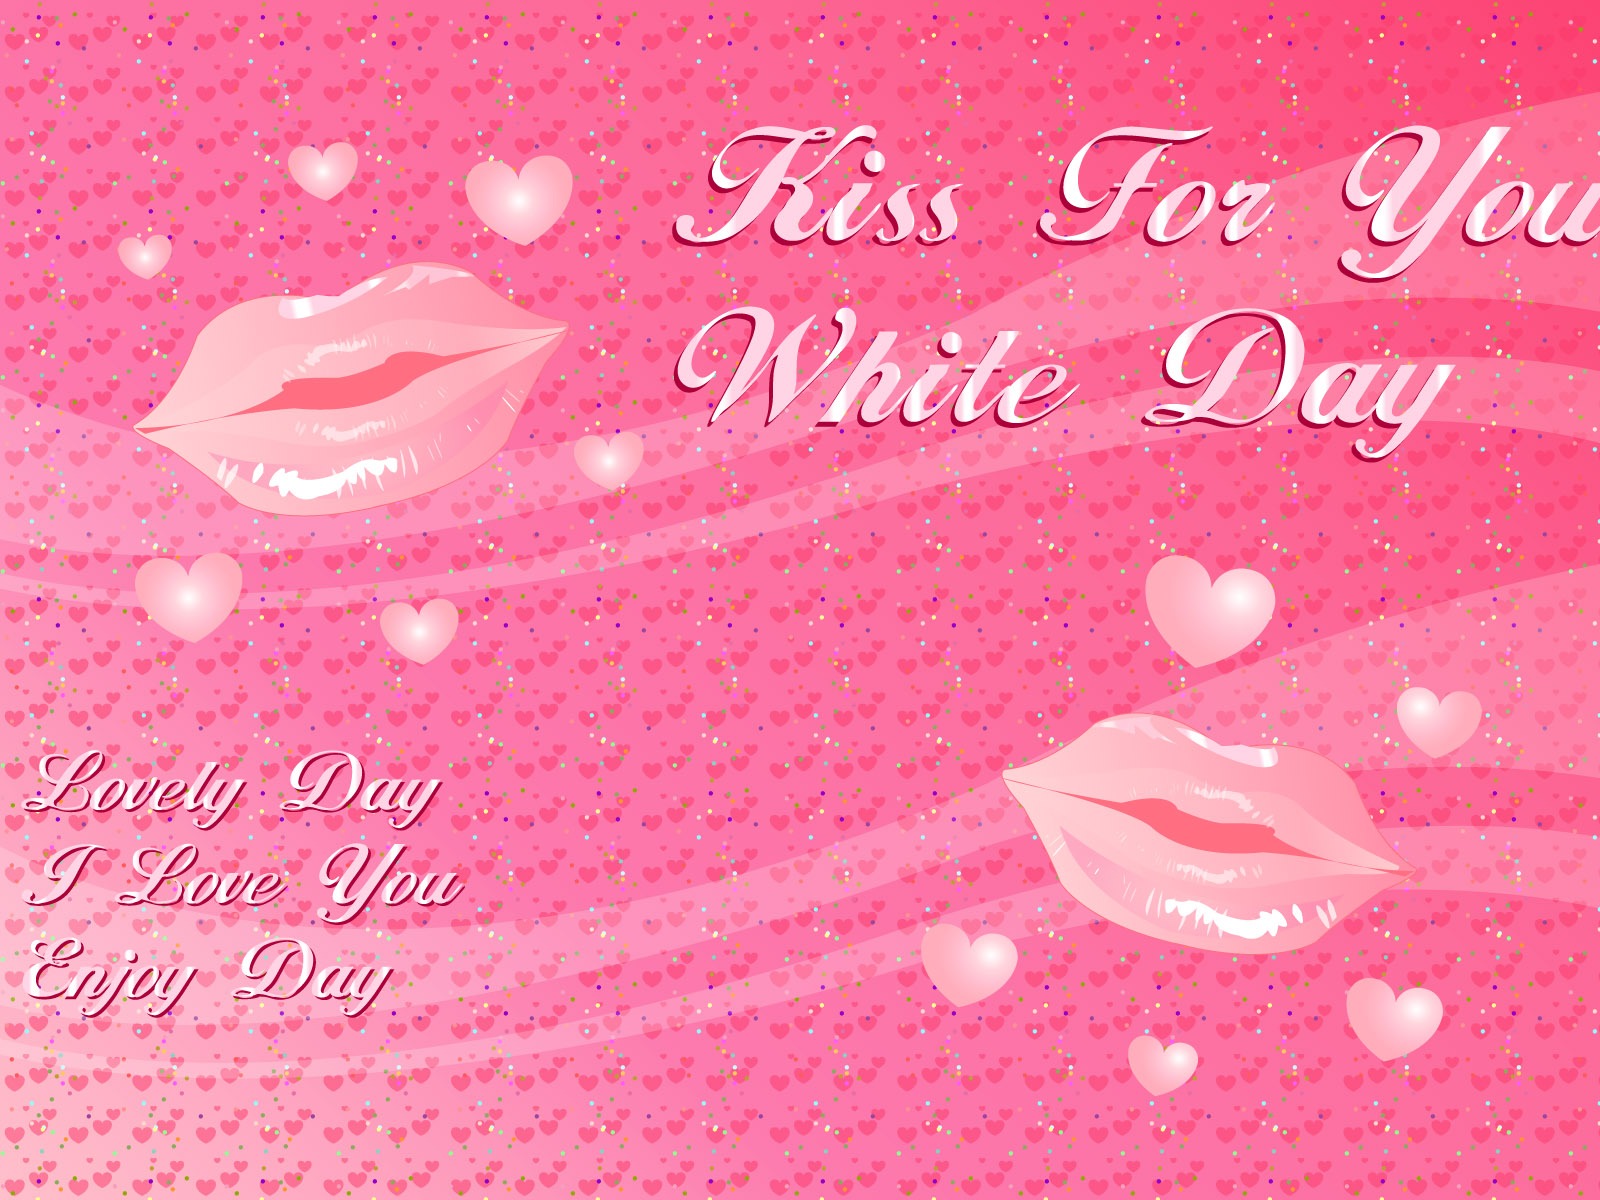 Valentine's Day Theme Wallpapers (1) #5 - 1600x1200